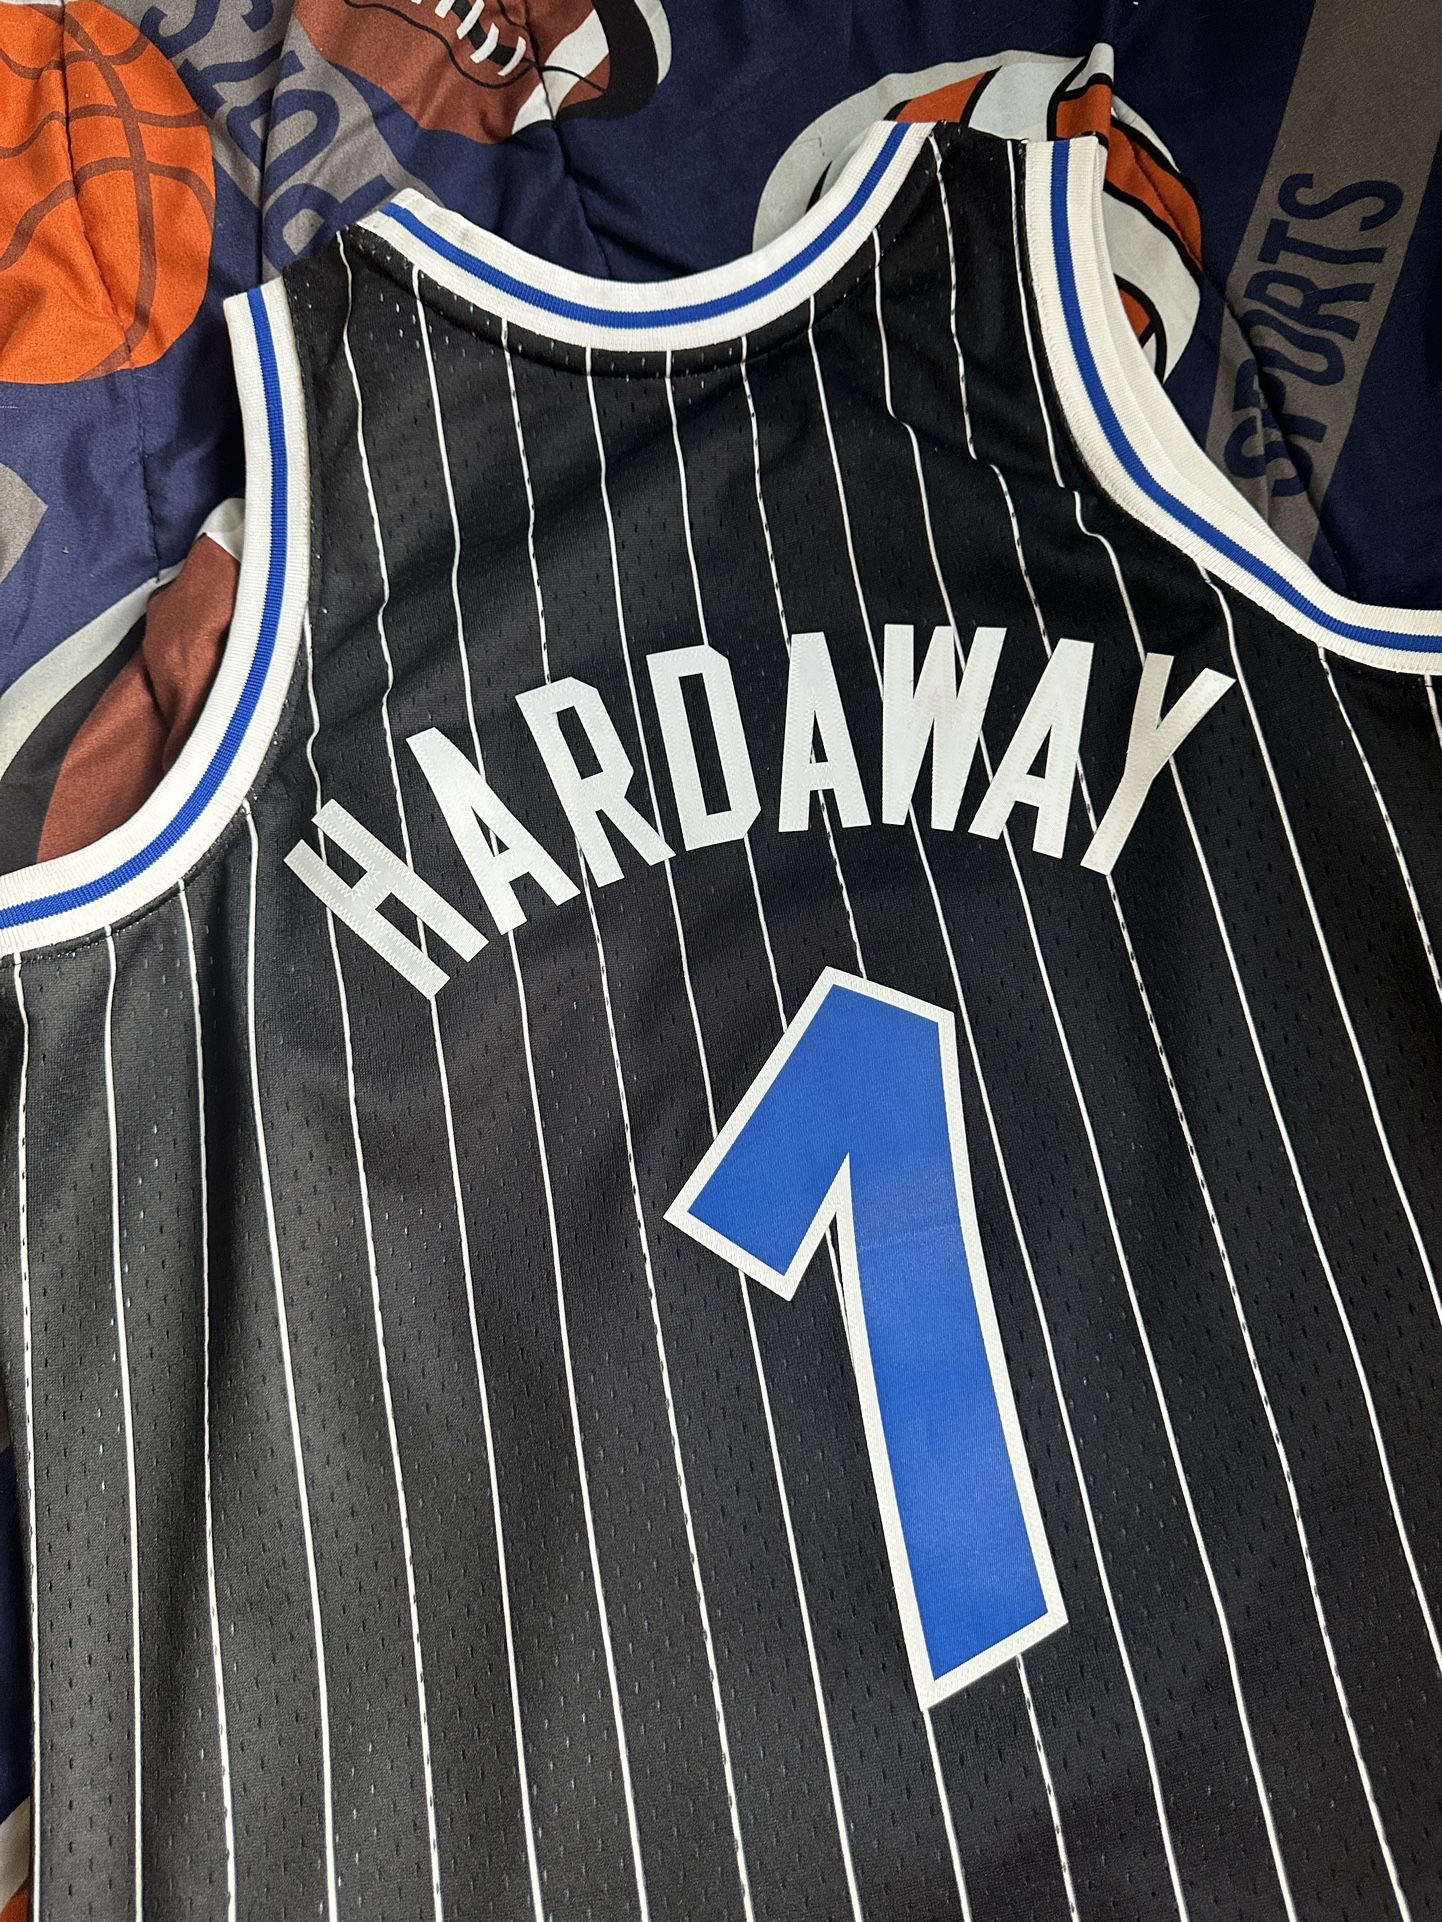 Orlando Magic Penny Hardaway Jersey Size Large Fits Loose Not Fitted Length  Extra 2” for Sale in Pompano Beach, FL - OfferUp